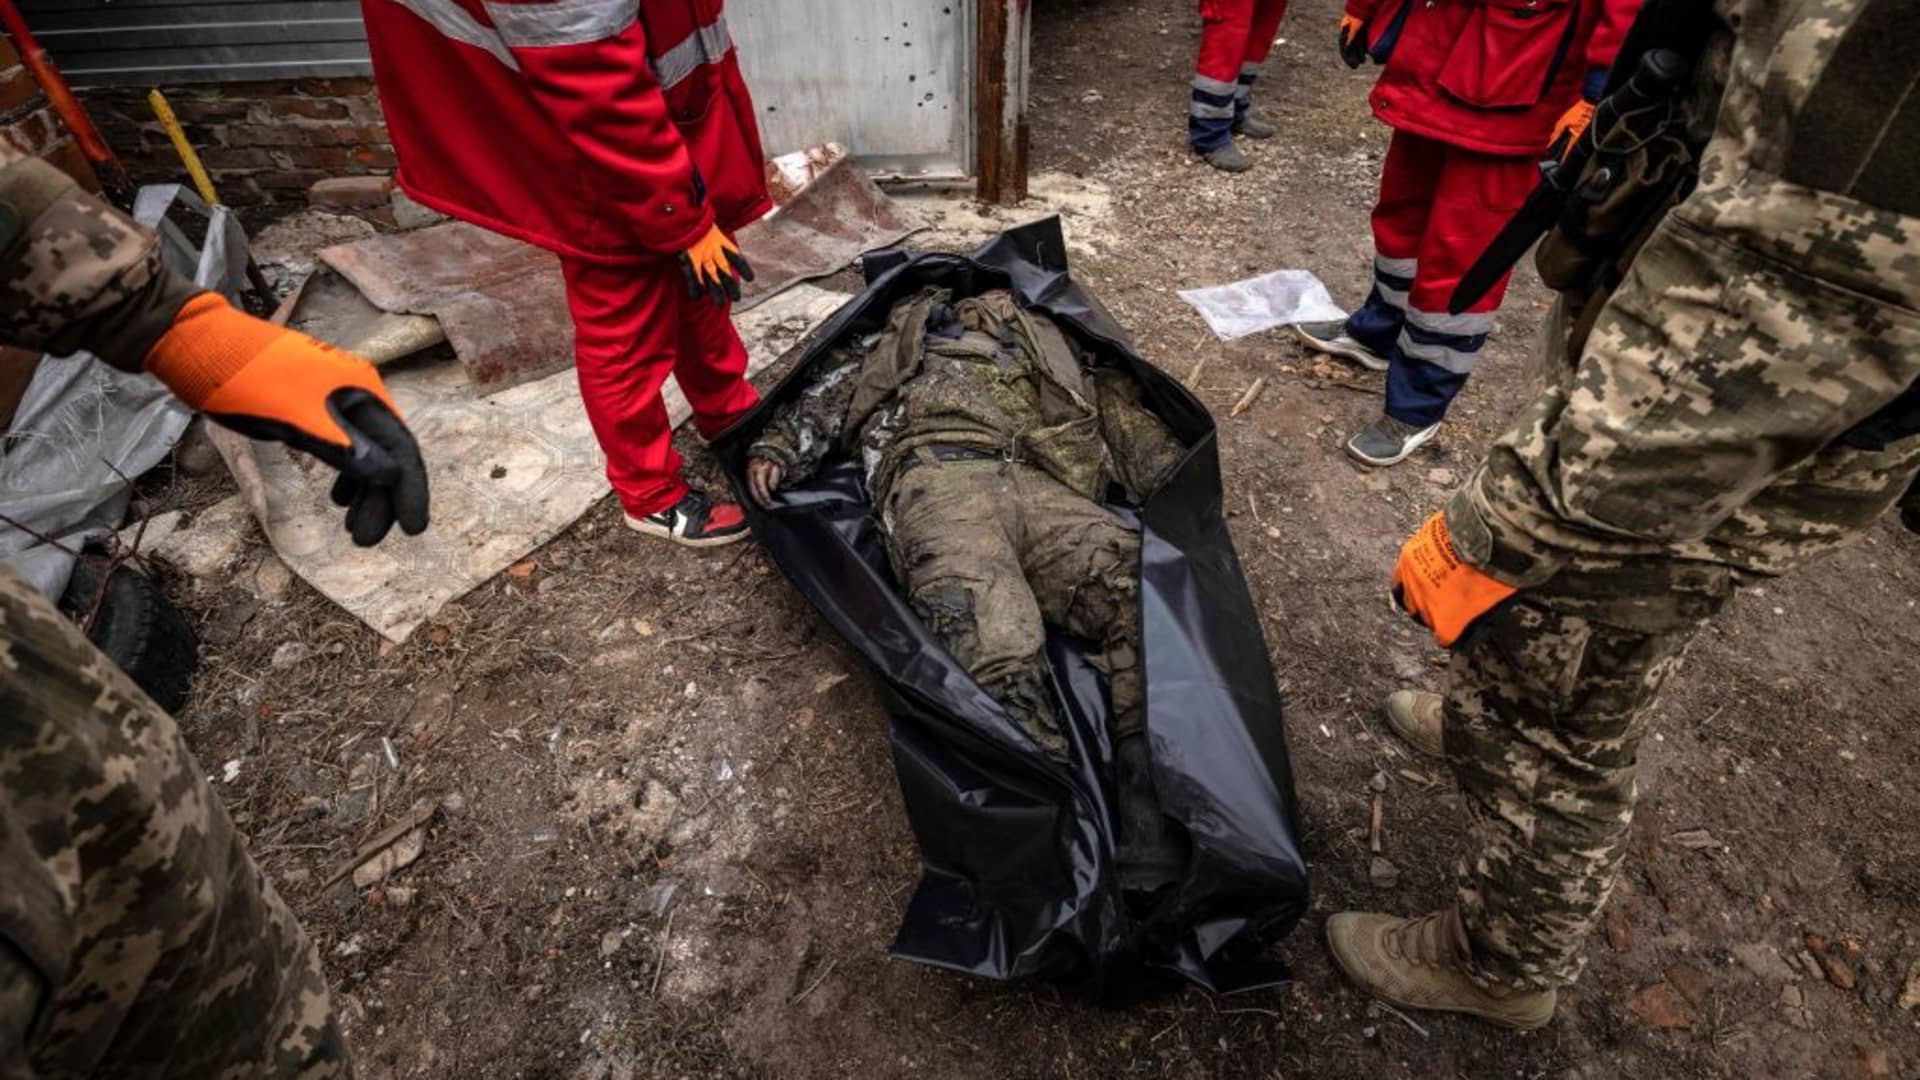 EDITORS NOTE: Graphic content / Ukrainian medics carry the body of a Russian soldier after the Ukranian troops retook the village of Mala Rogan, east of Kharkiv, on March 30, 2022.